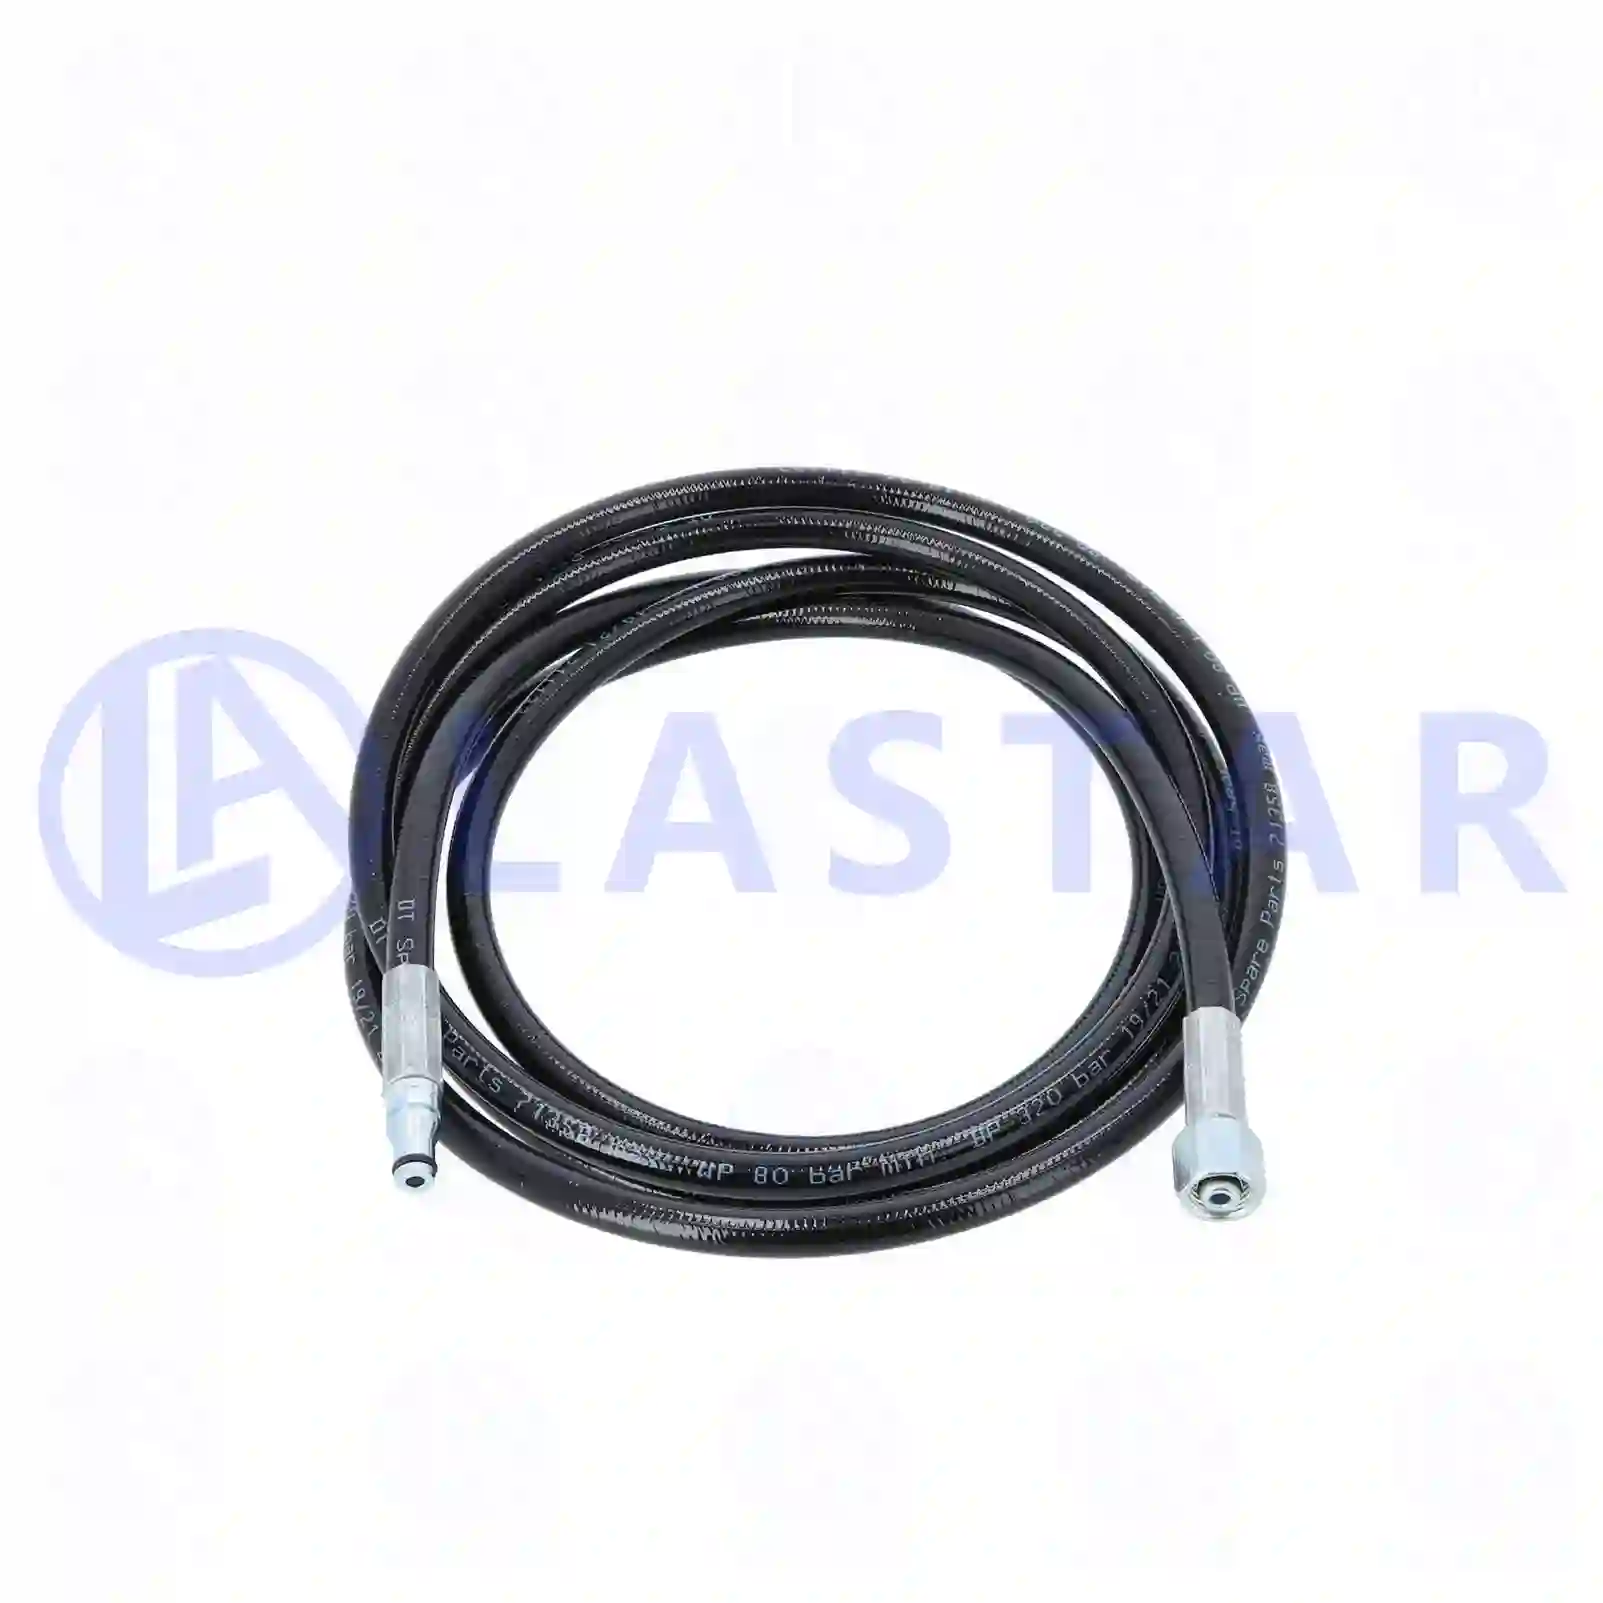 Hydraulic hose, 77722229, 20443290 ||  77722229 Lastar Spare Part | Truck Spare Parts, Auotomotive Spare Parts Hydraulic hose, 77722229, 20443290 ||  77722229 Lastar Spare Part | Truck Spare Parts, Auotomotive Spare Parts